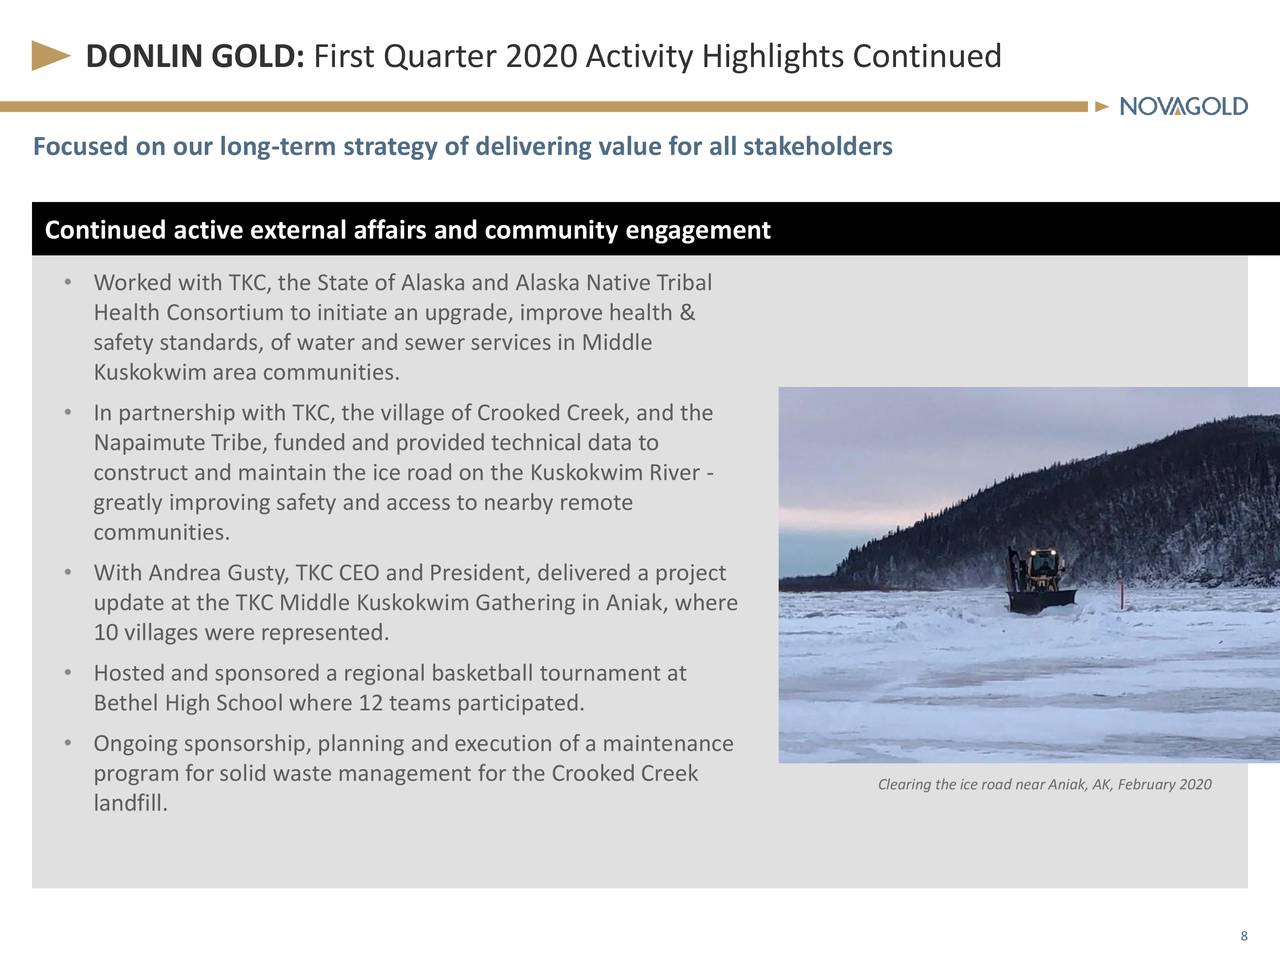 DONLIN GOLD: First Quarter 2020 Activity Highlights Continued